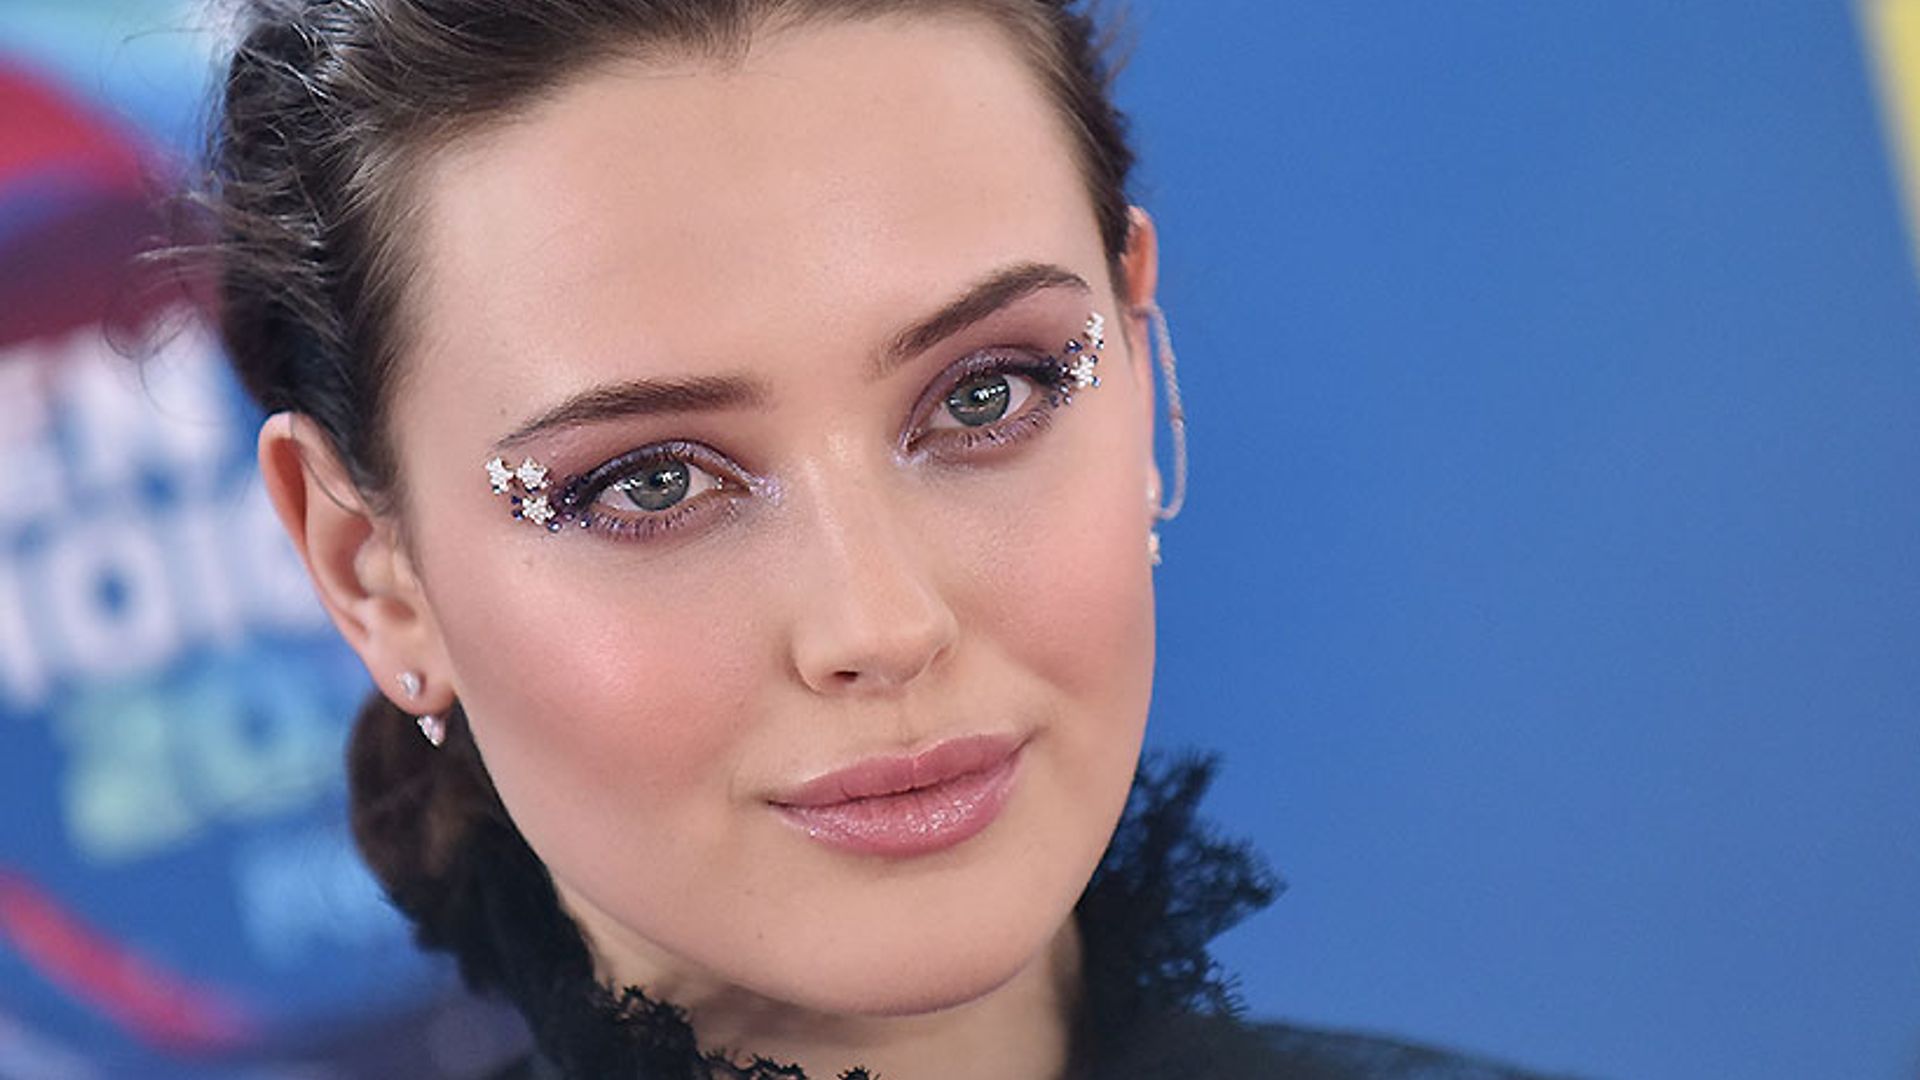 Seeing stars! This 13 Reasons Why actress proves eye art isn't just for festivals